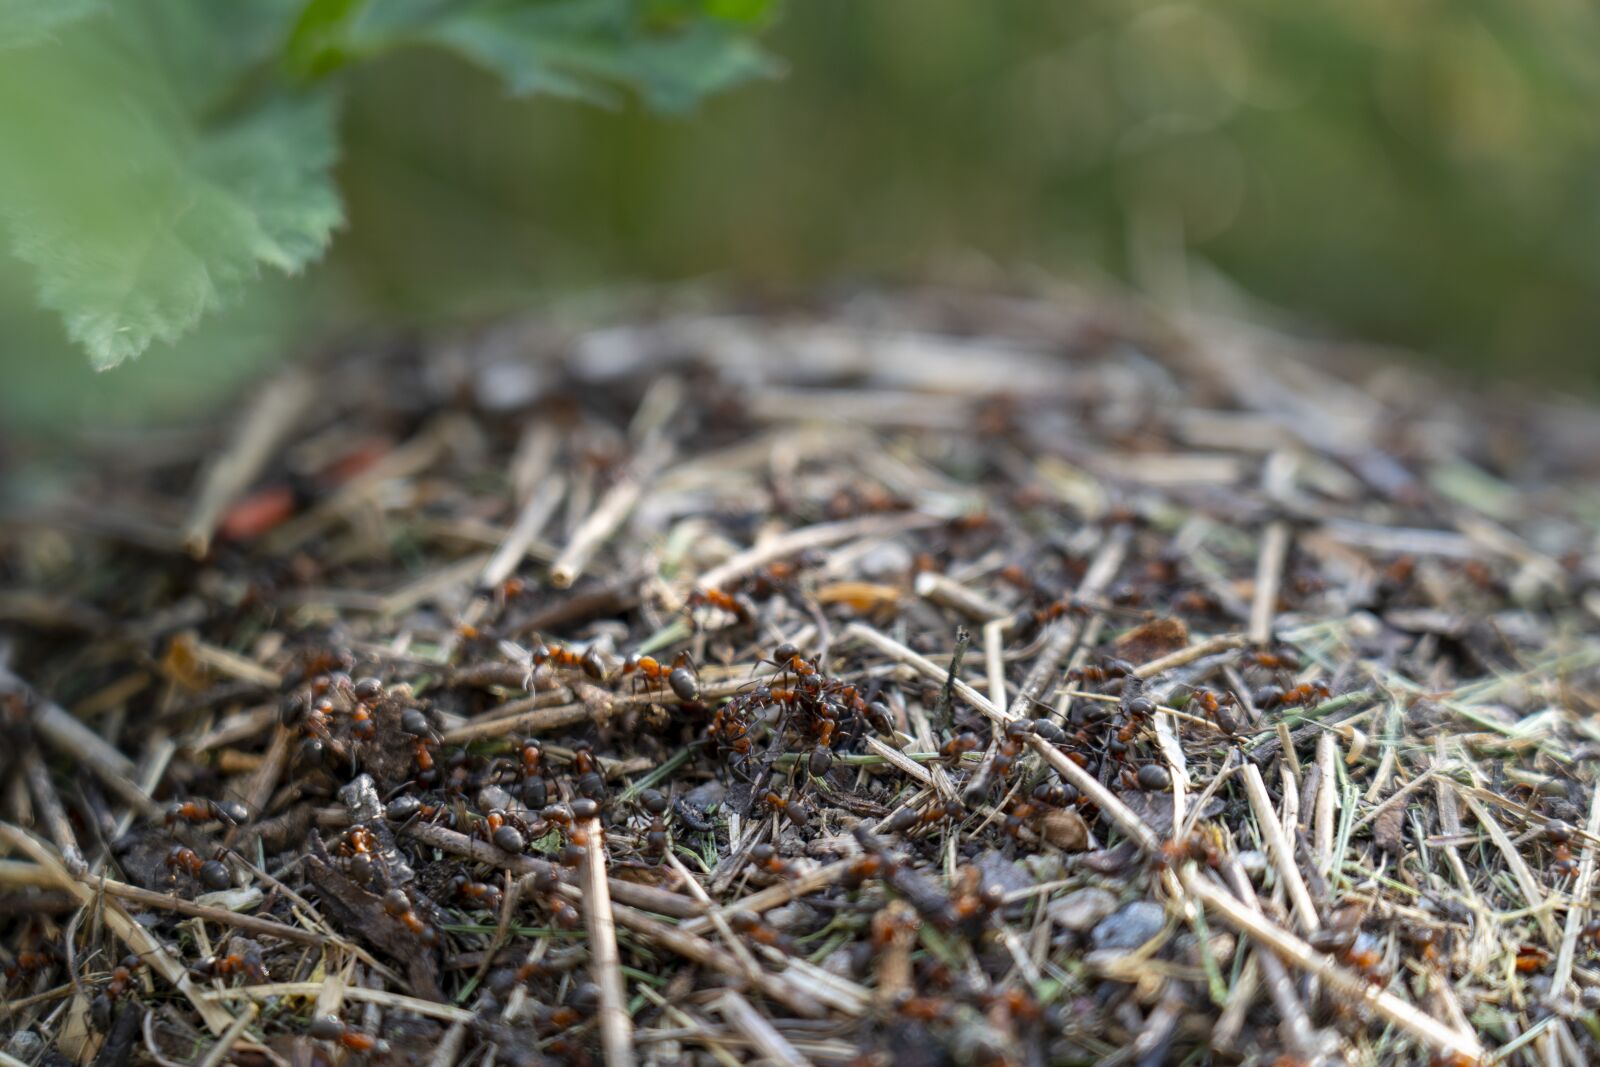 Sony a7 III sample photo. Ants, anthill, nature photography